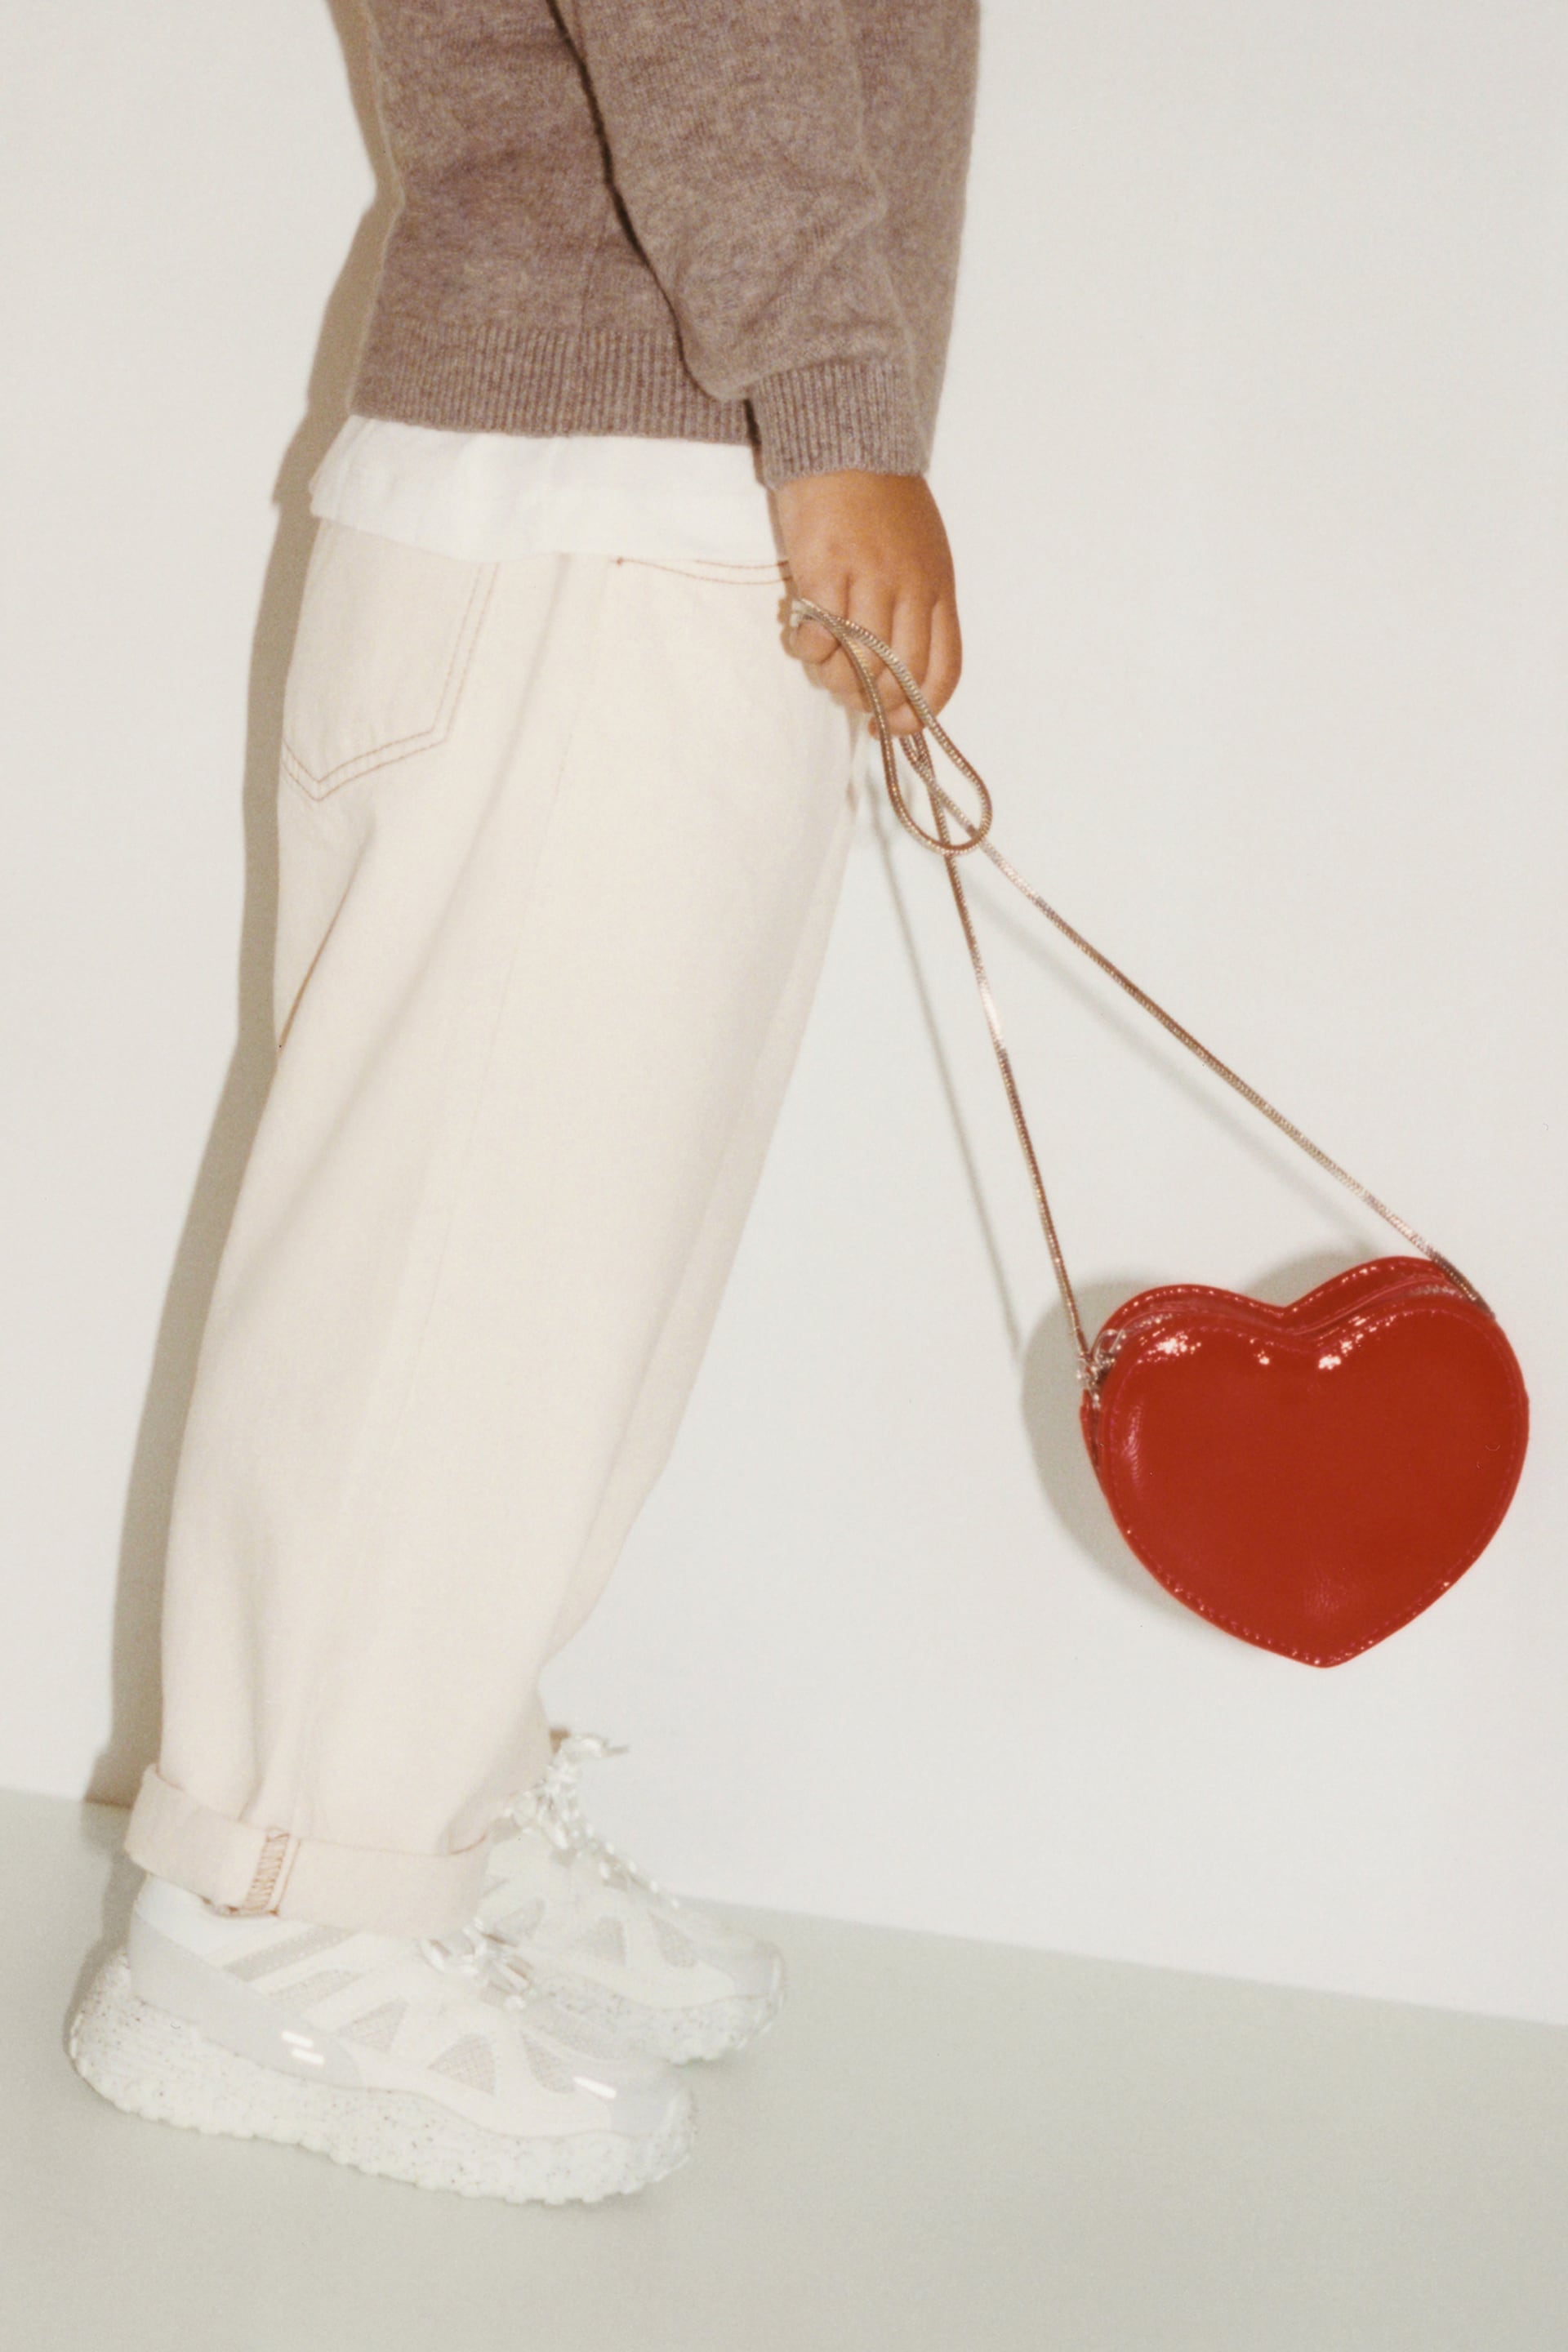 red heart bag